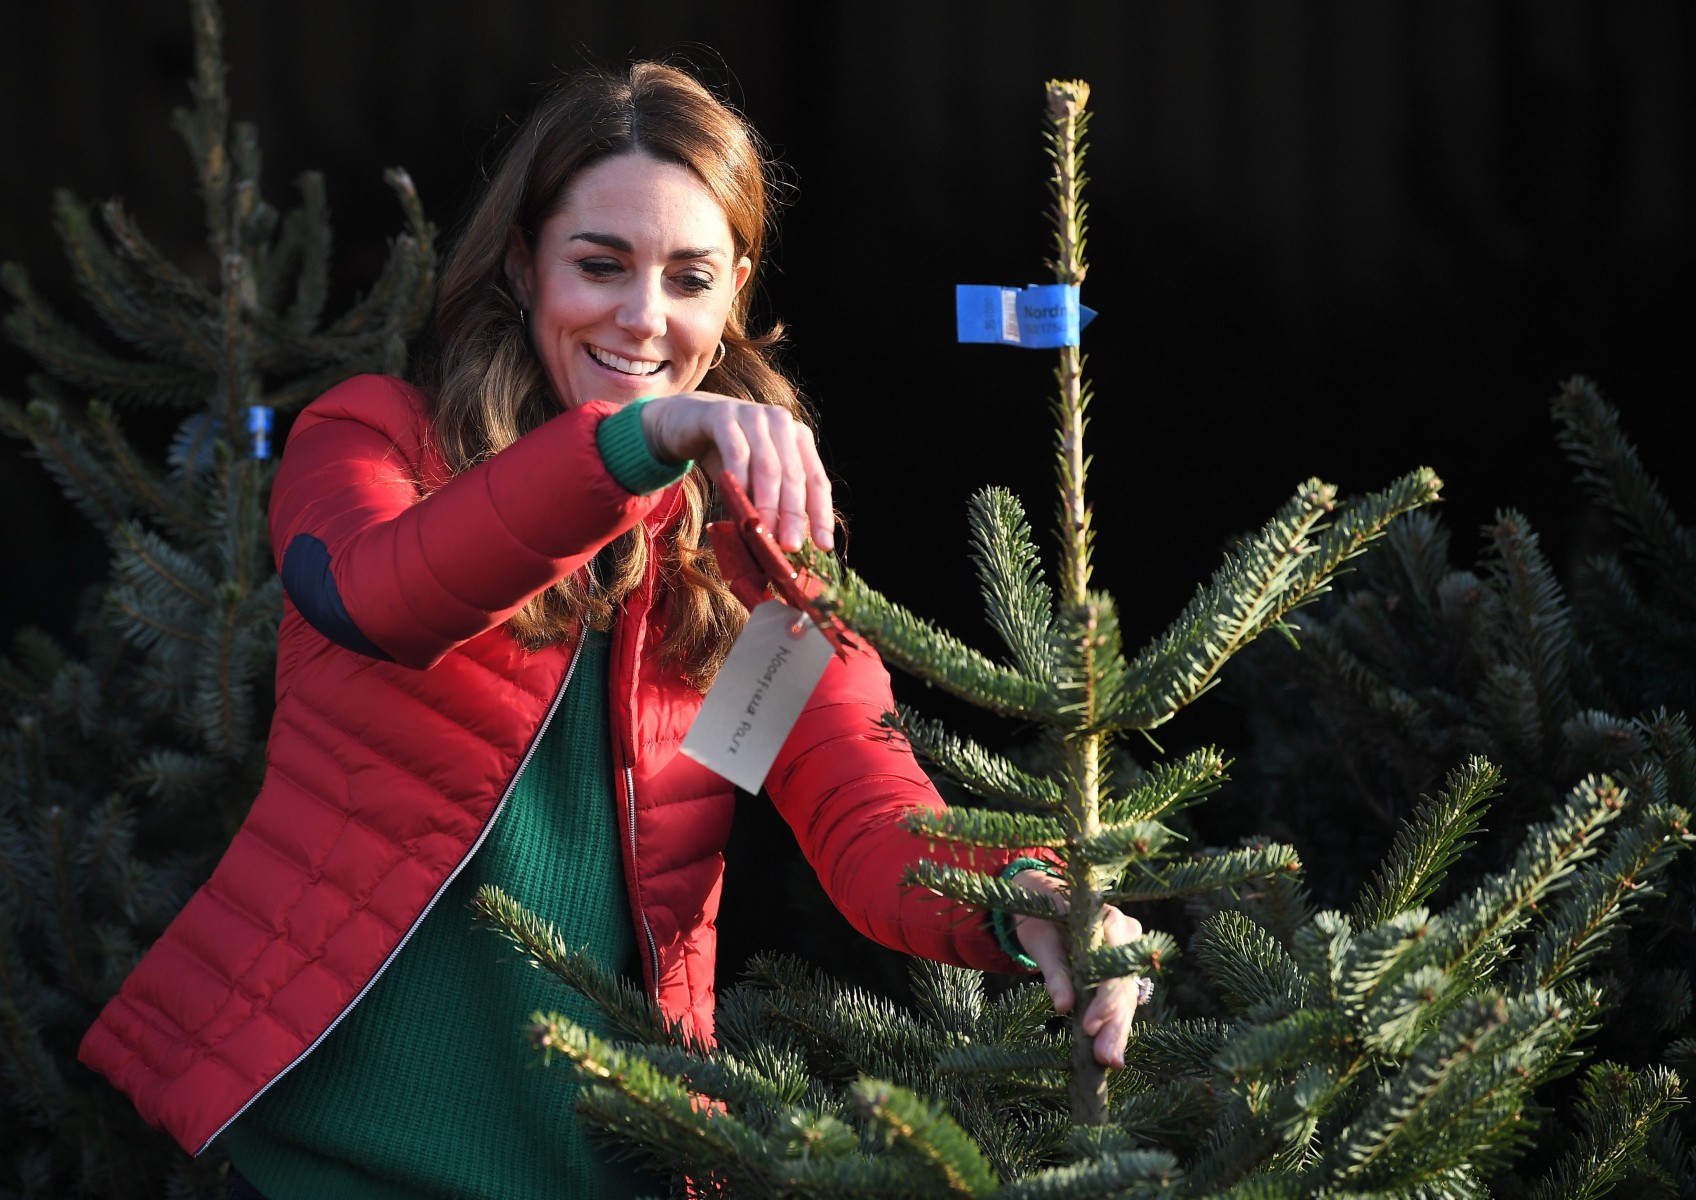 Kate Middleton inspects a Christmas tree during the visit